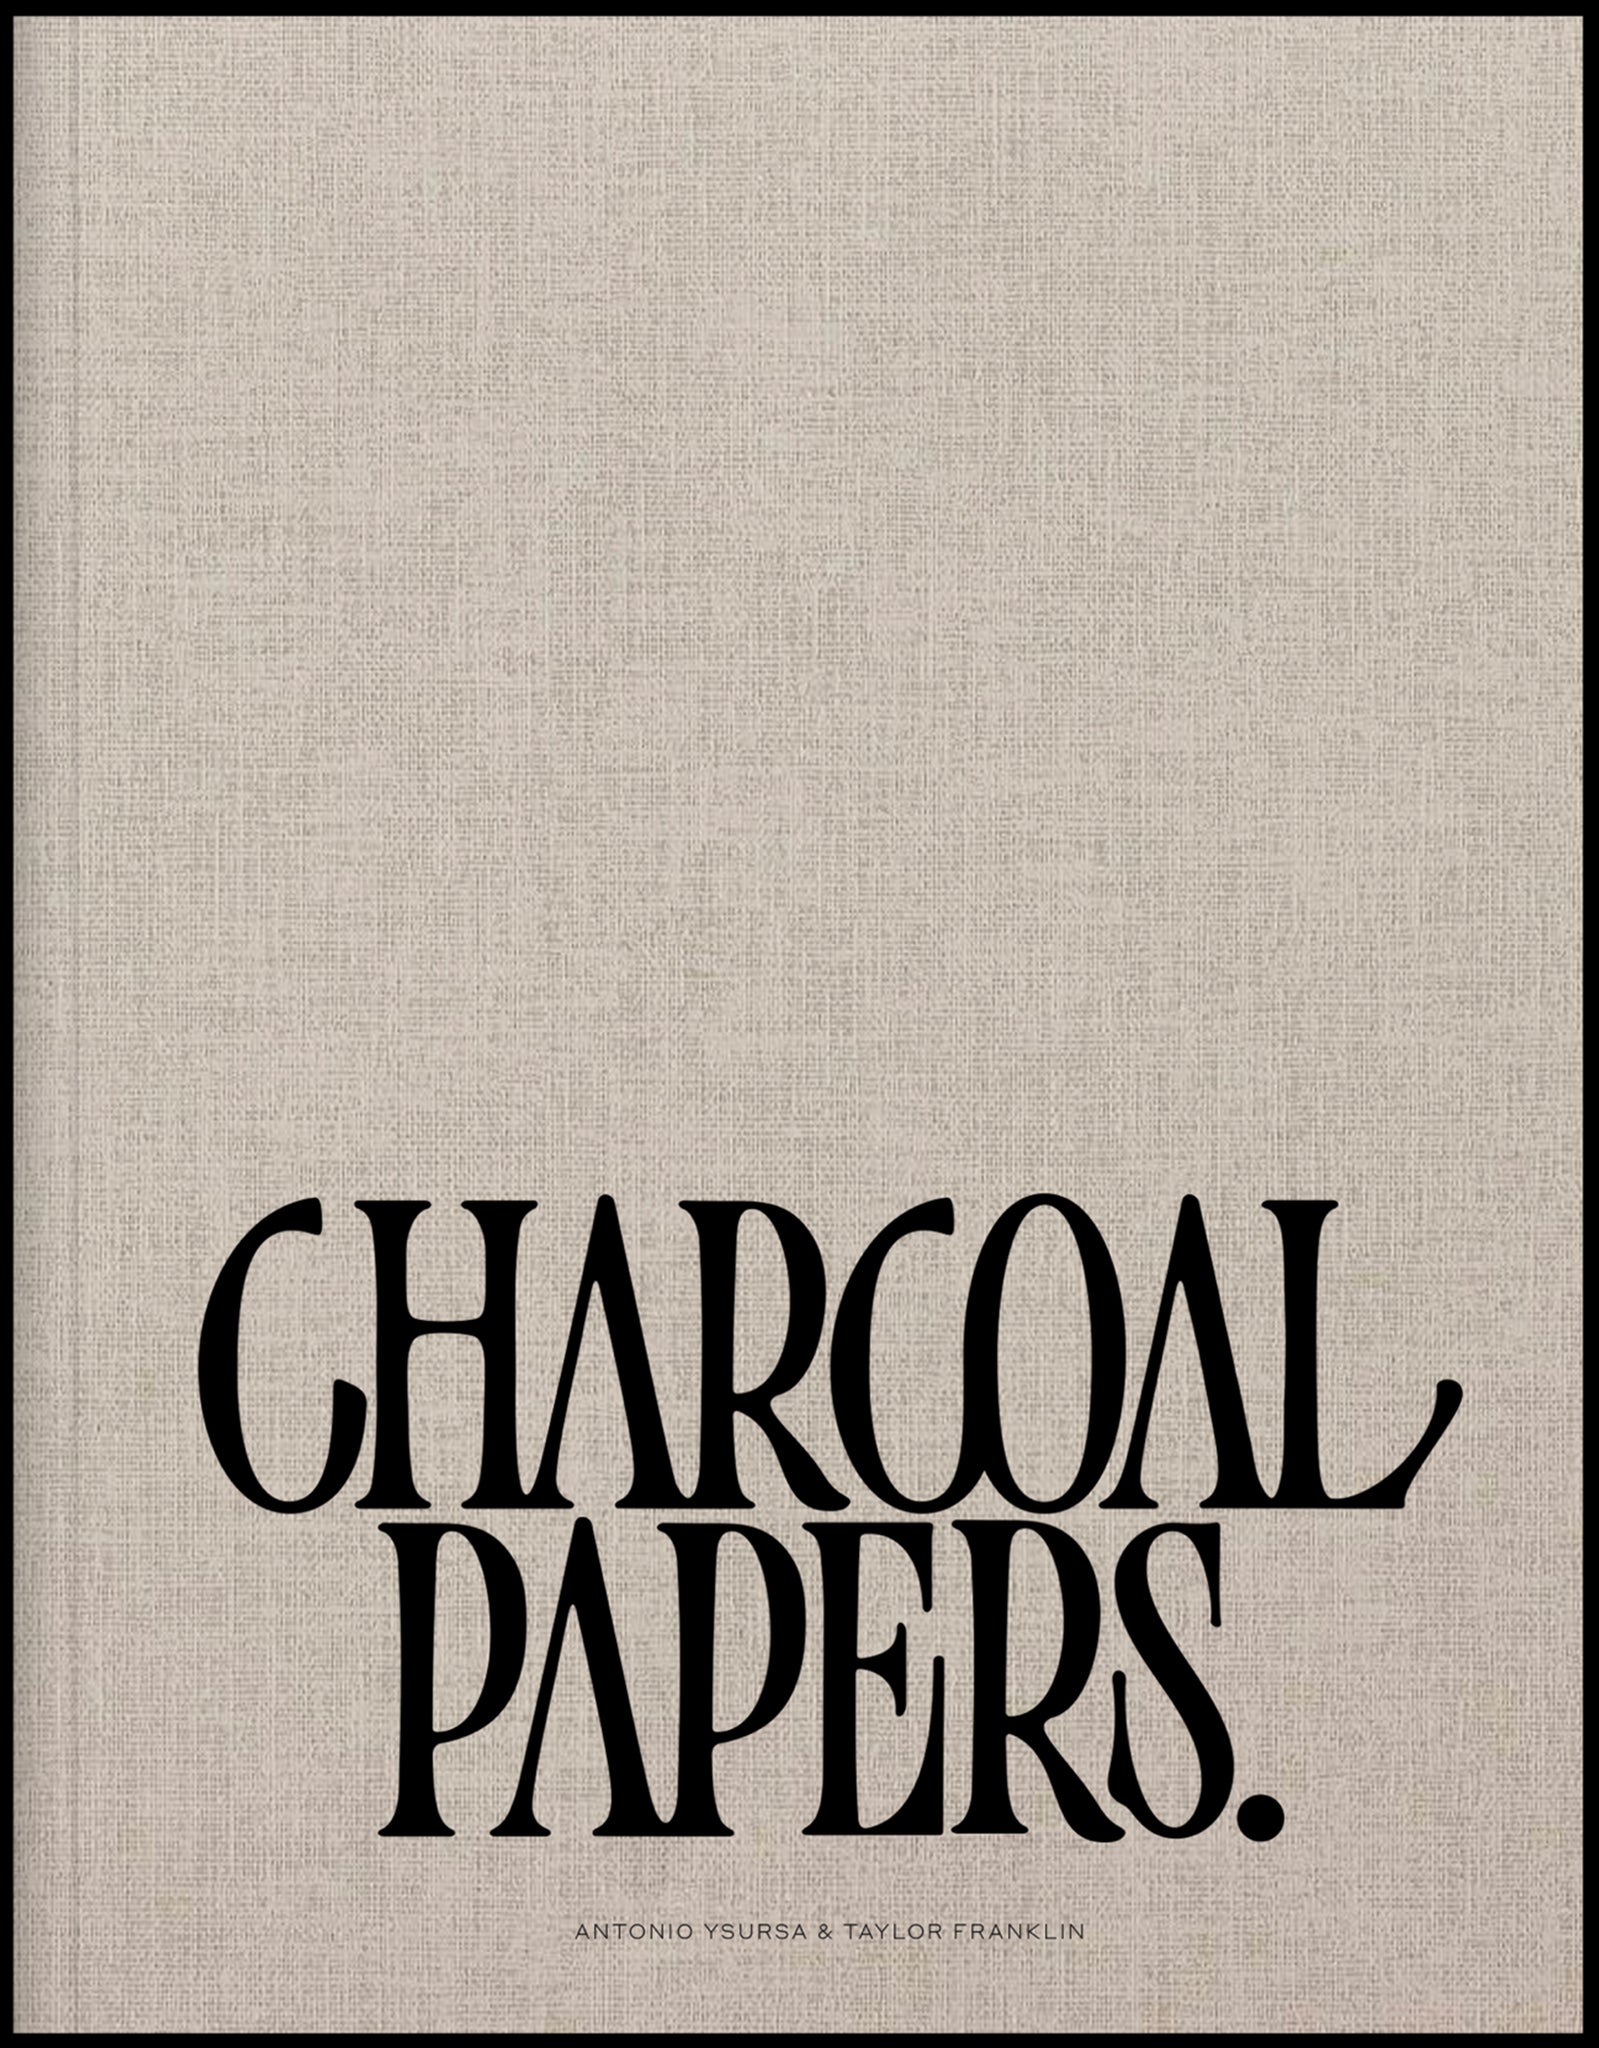 Tan linen cover with the words “charcoal papers” written across the lower bottom. “Antonio Ysursa and Taylor Franklin” written below.